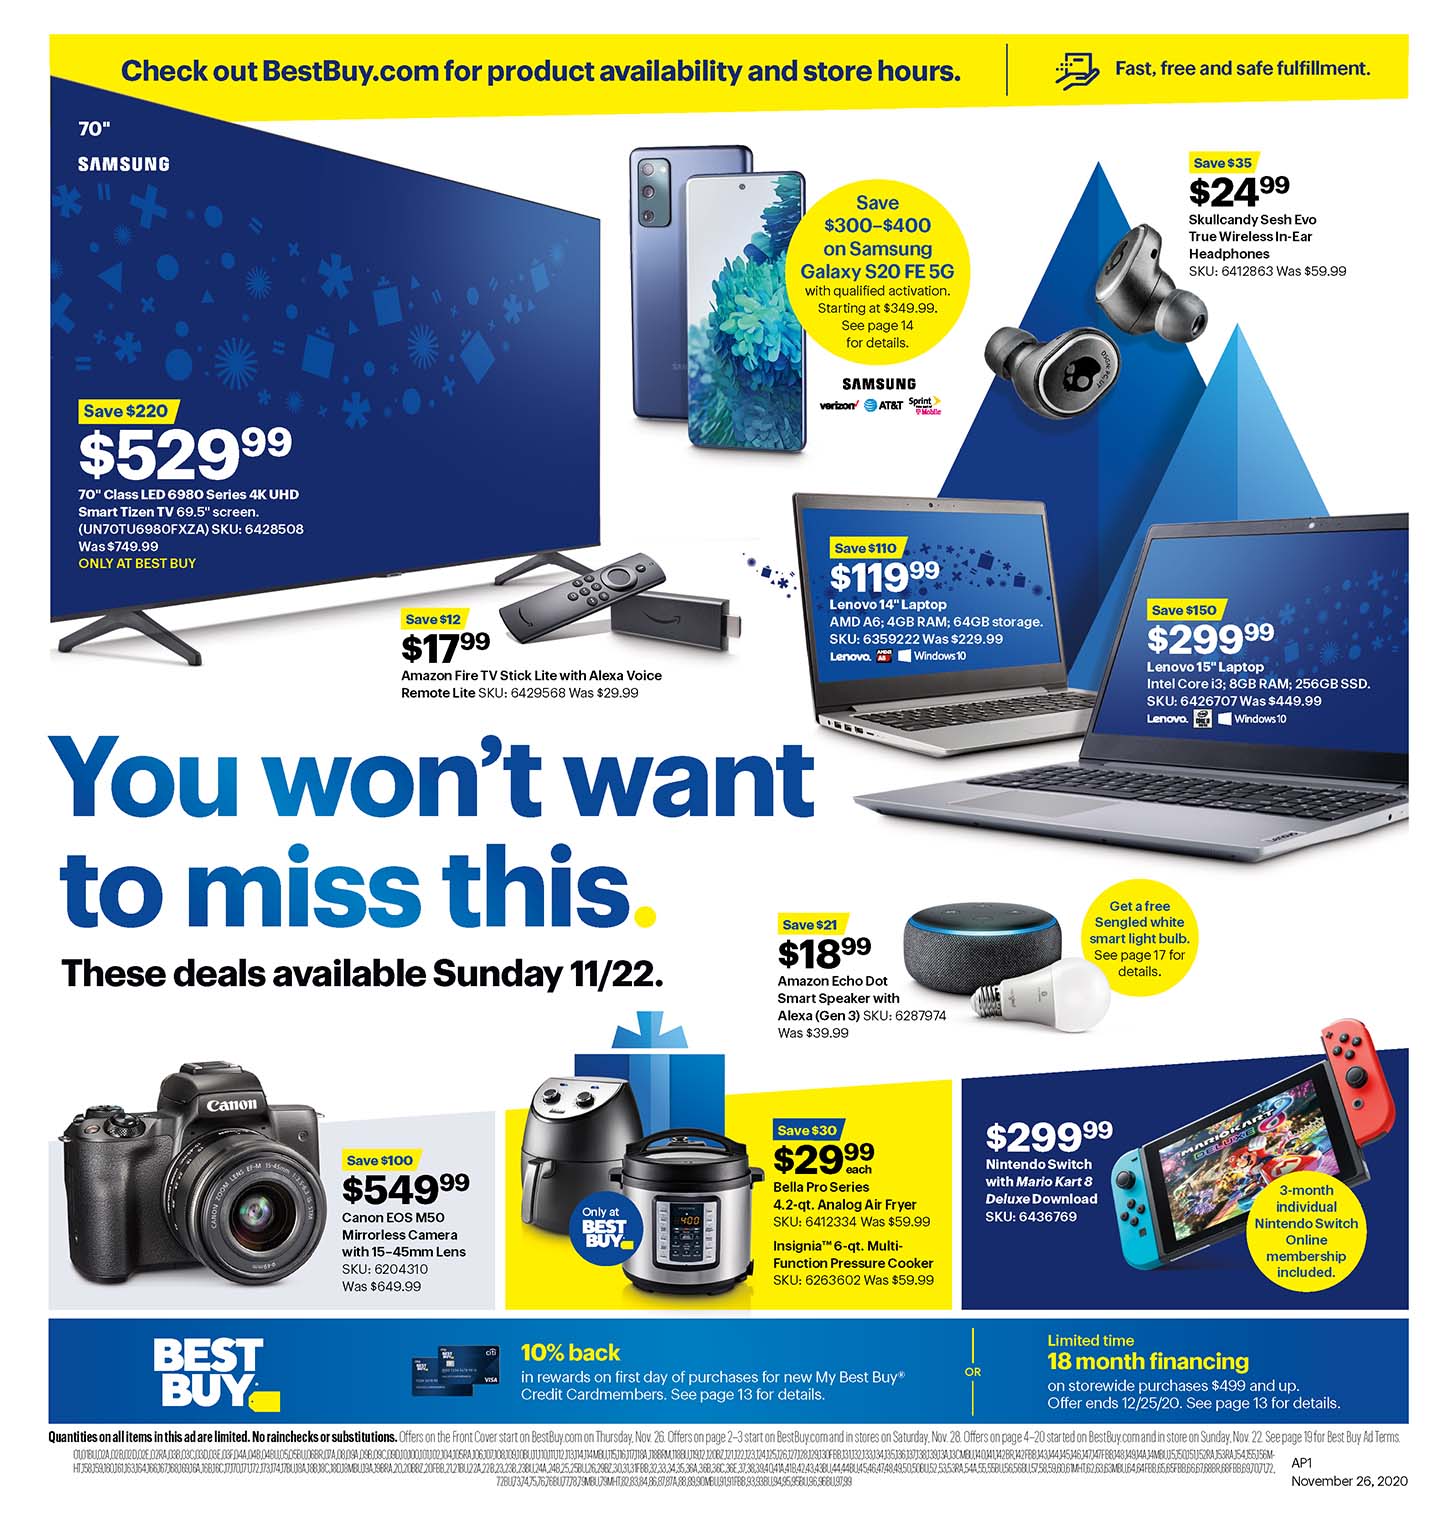 Best Buy Black Friday Ad 2020 - What Stores Have Black Friday Sales All Weekend